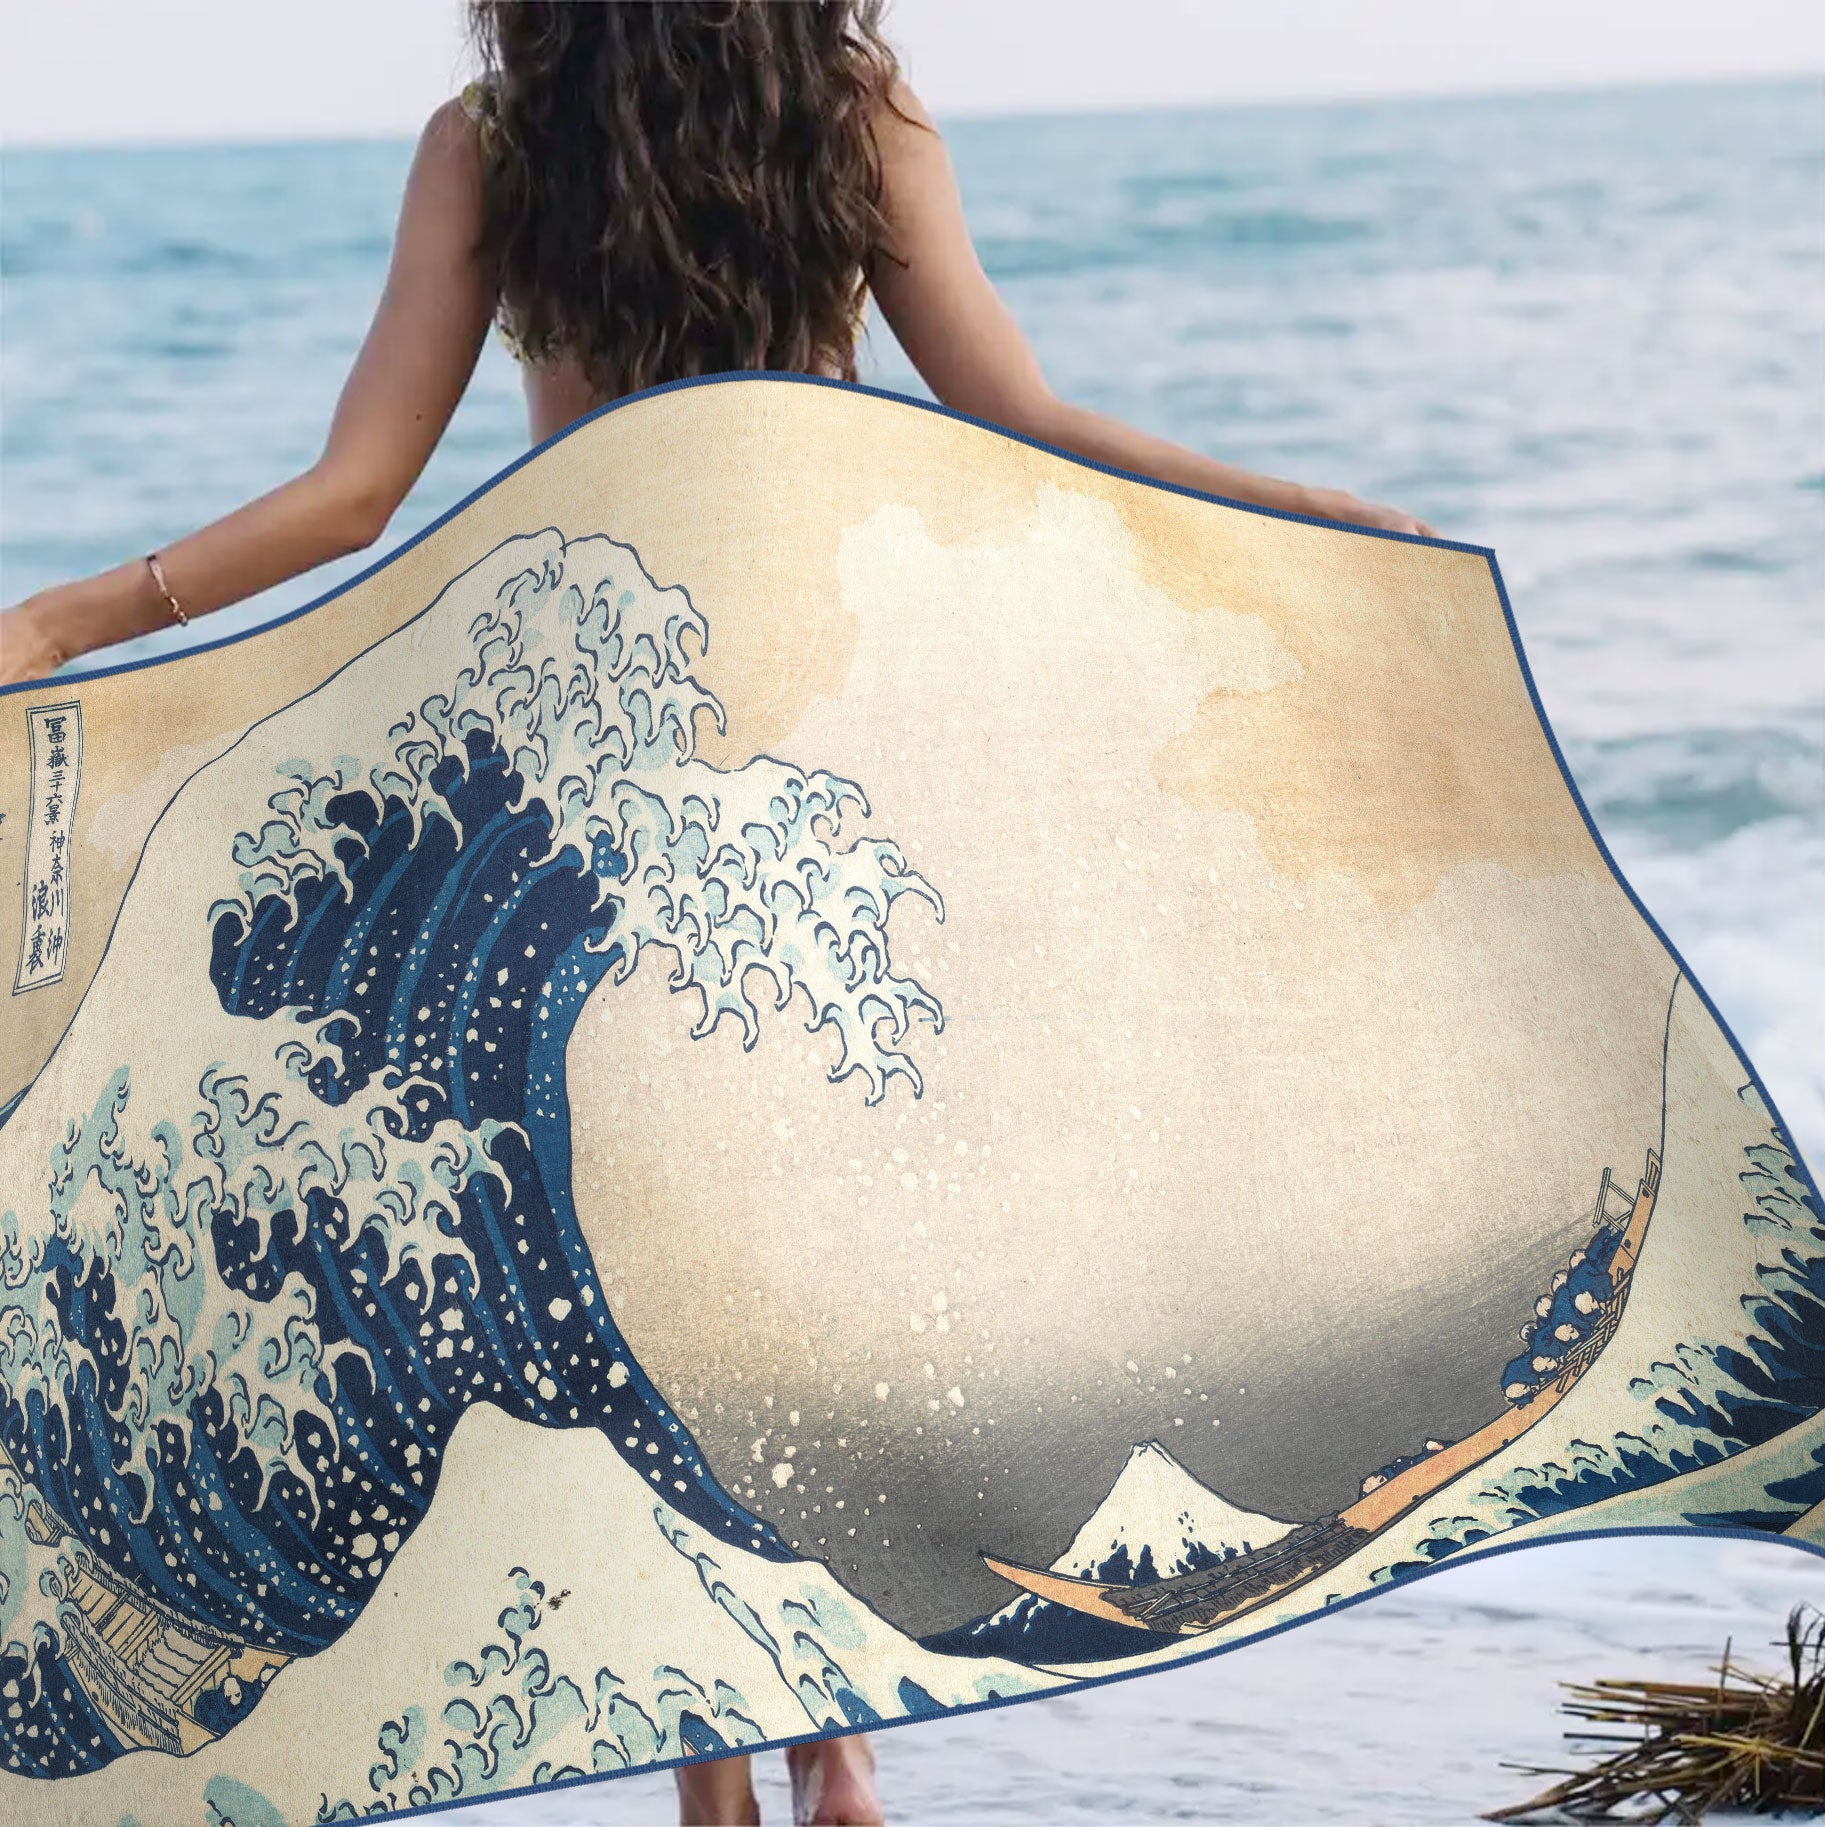 Oversized Beach Towel 40x63" - Microfiber, Quick-Dry, Hokusai The Great Wave